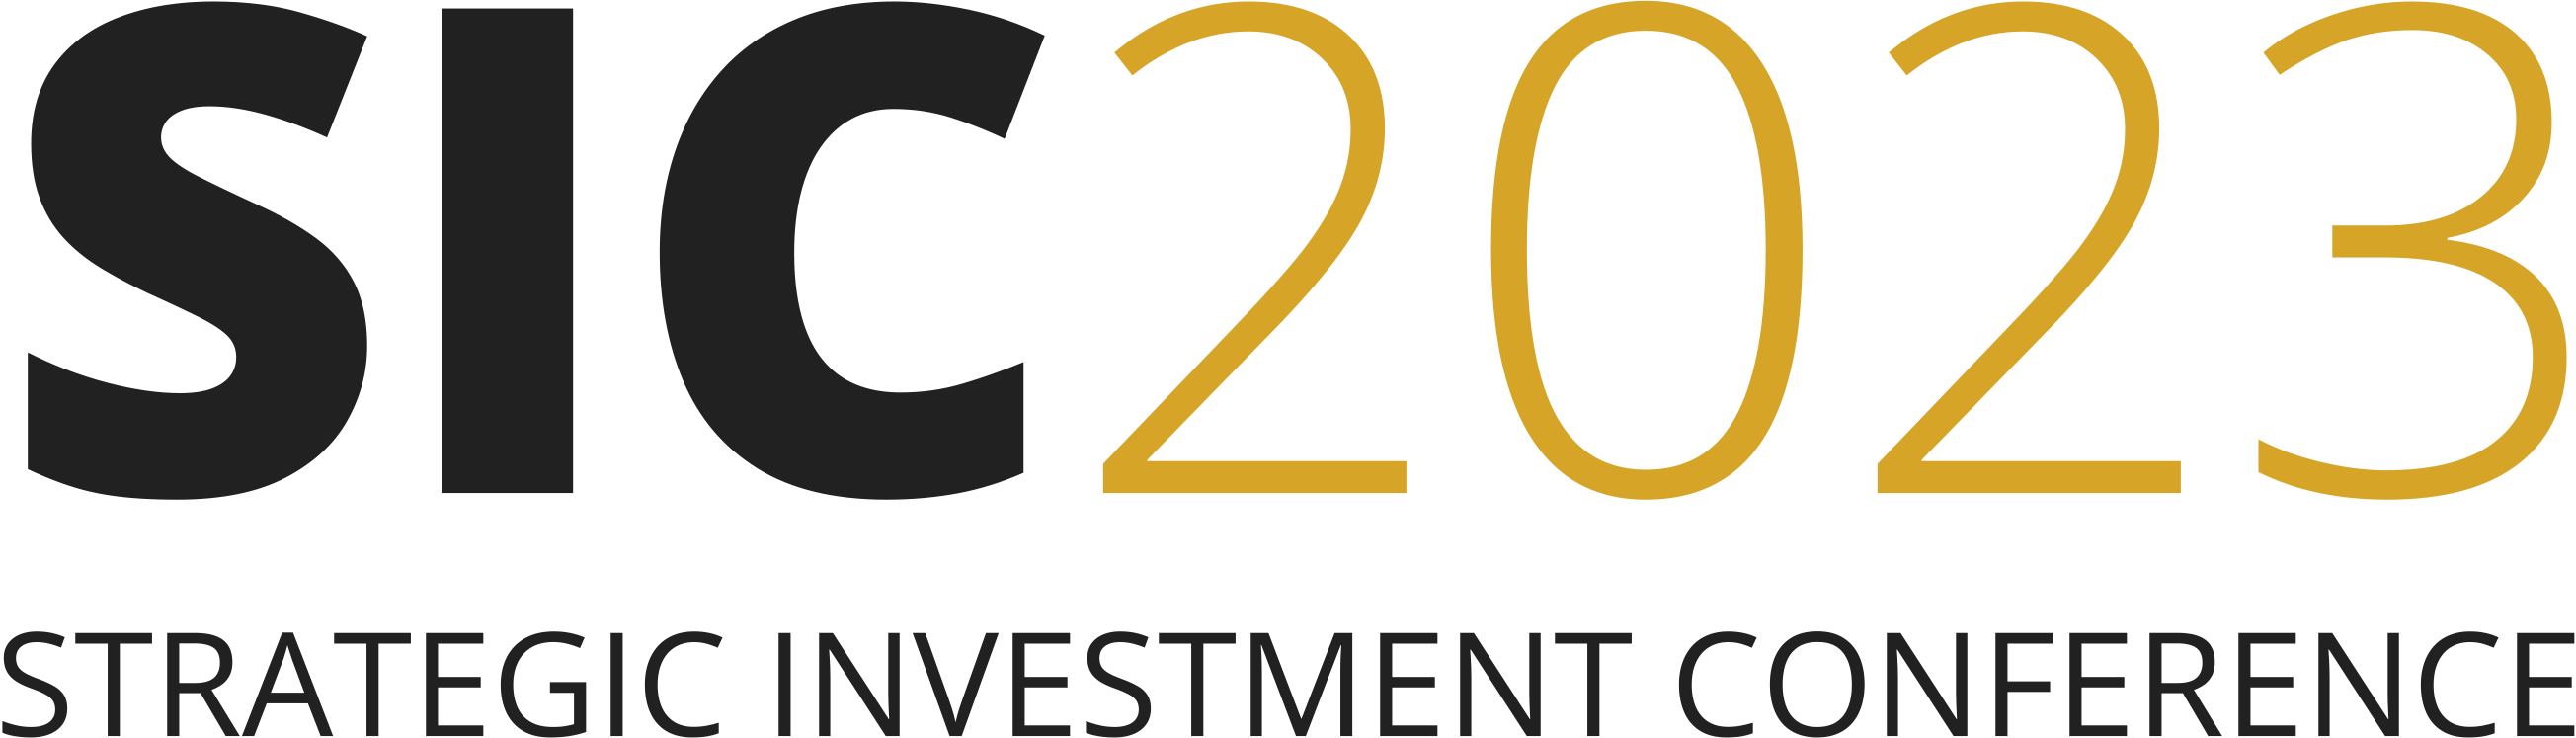 Strategic Investment Conference 2022